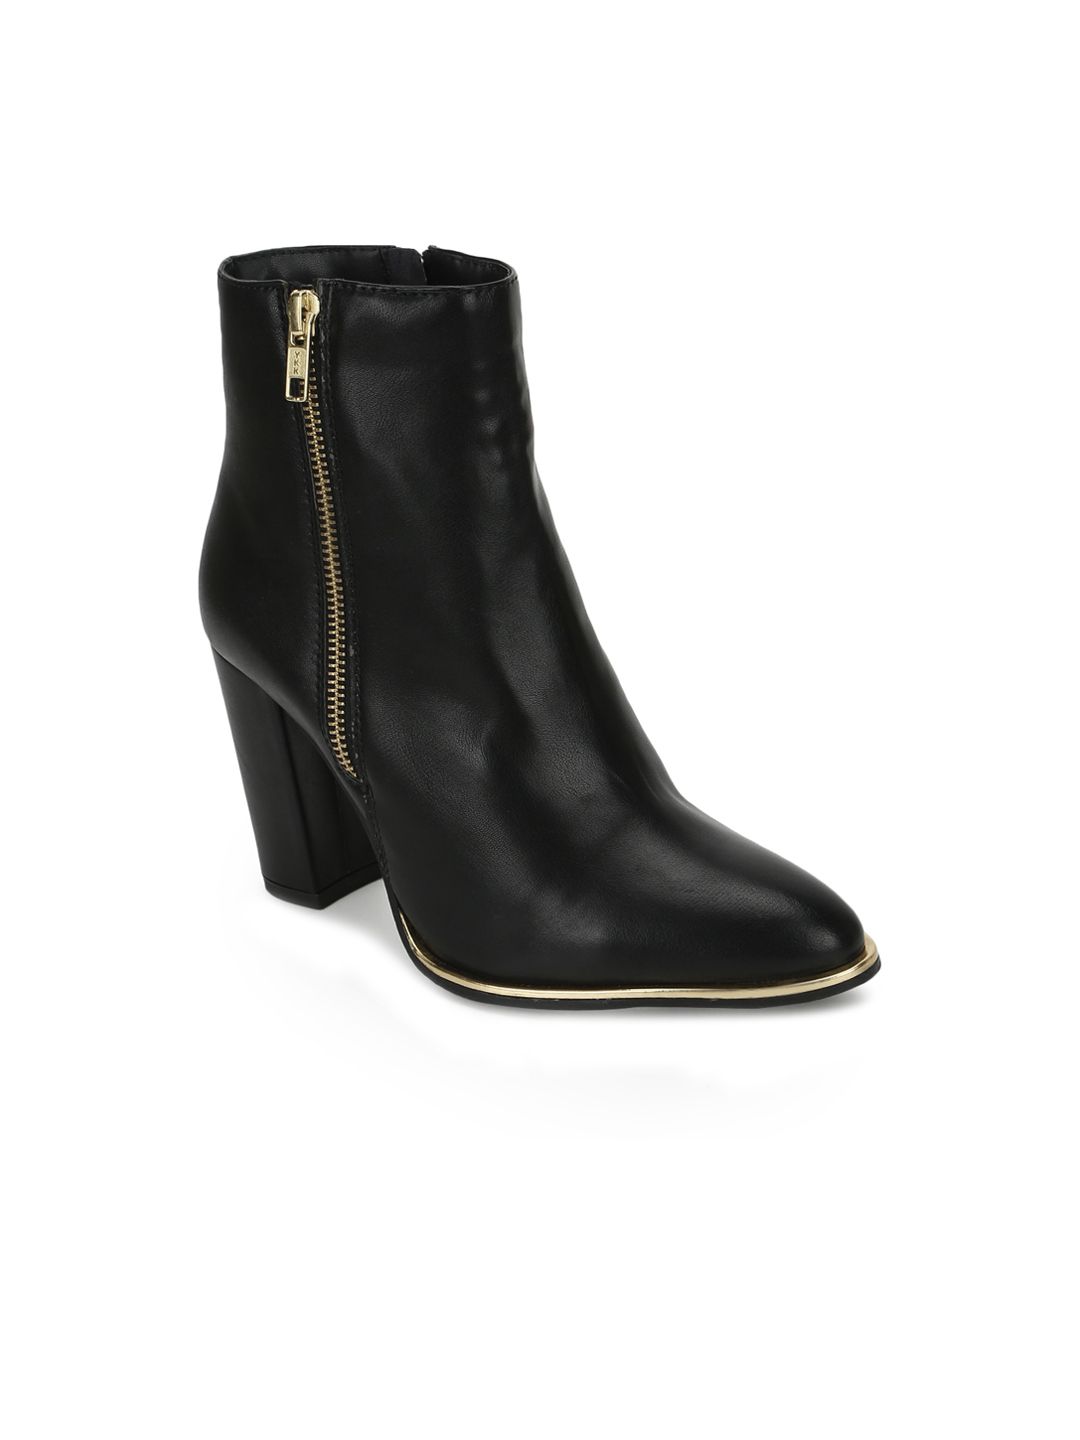 Truffle Collection Black Block Heeled Boots Price in India